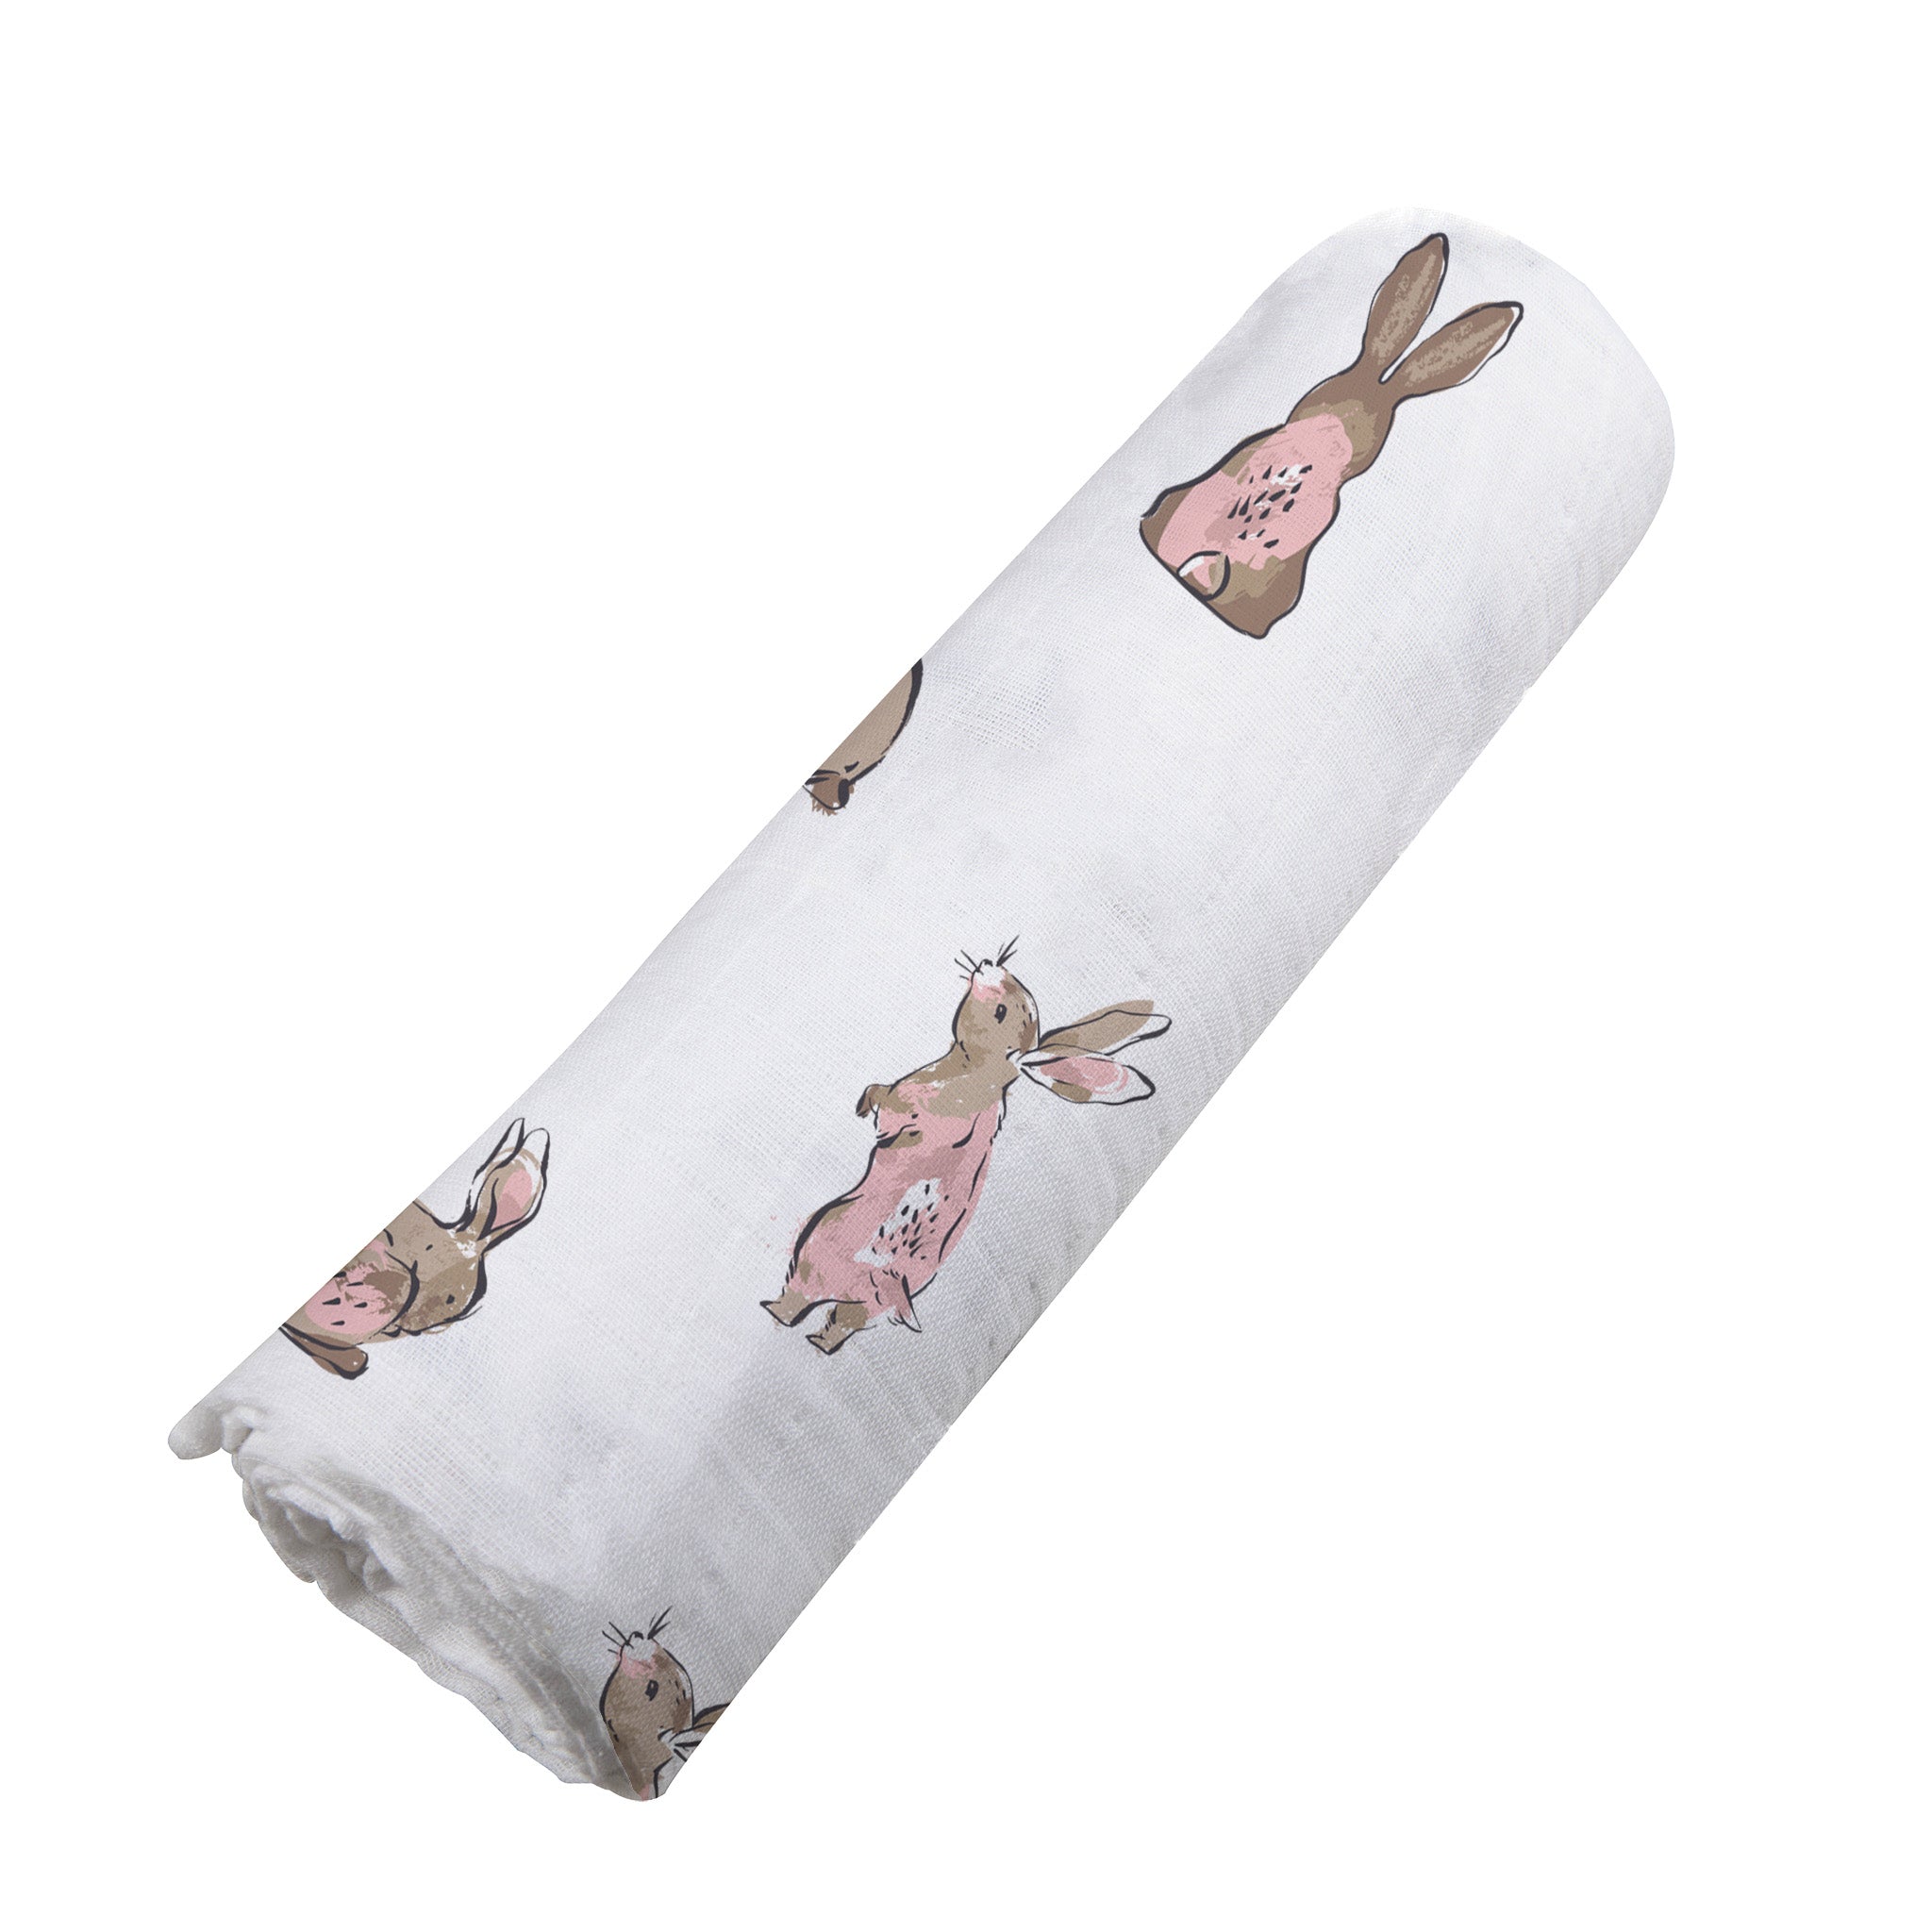 Baby swaddle with cute bunnies